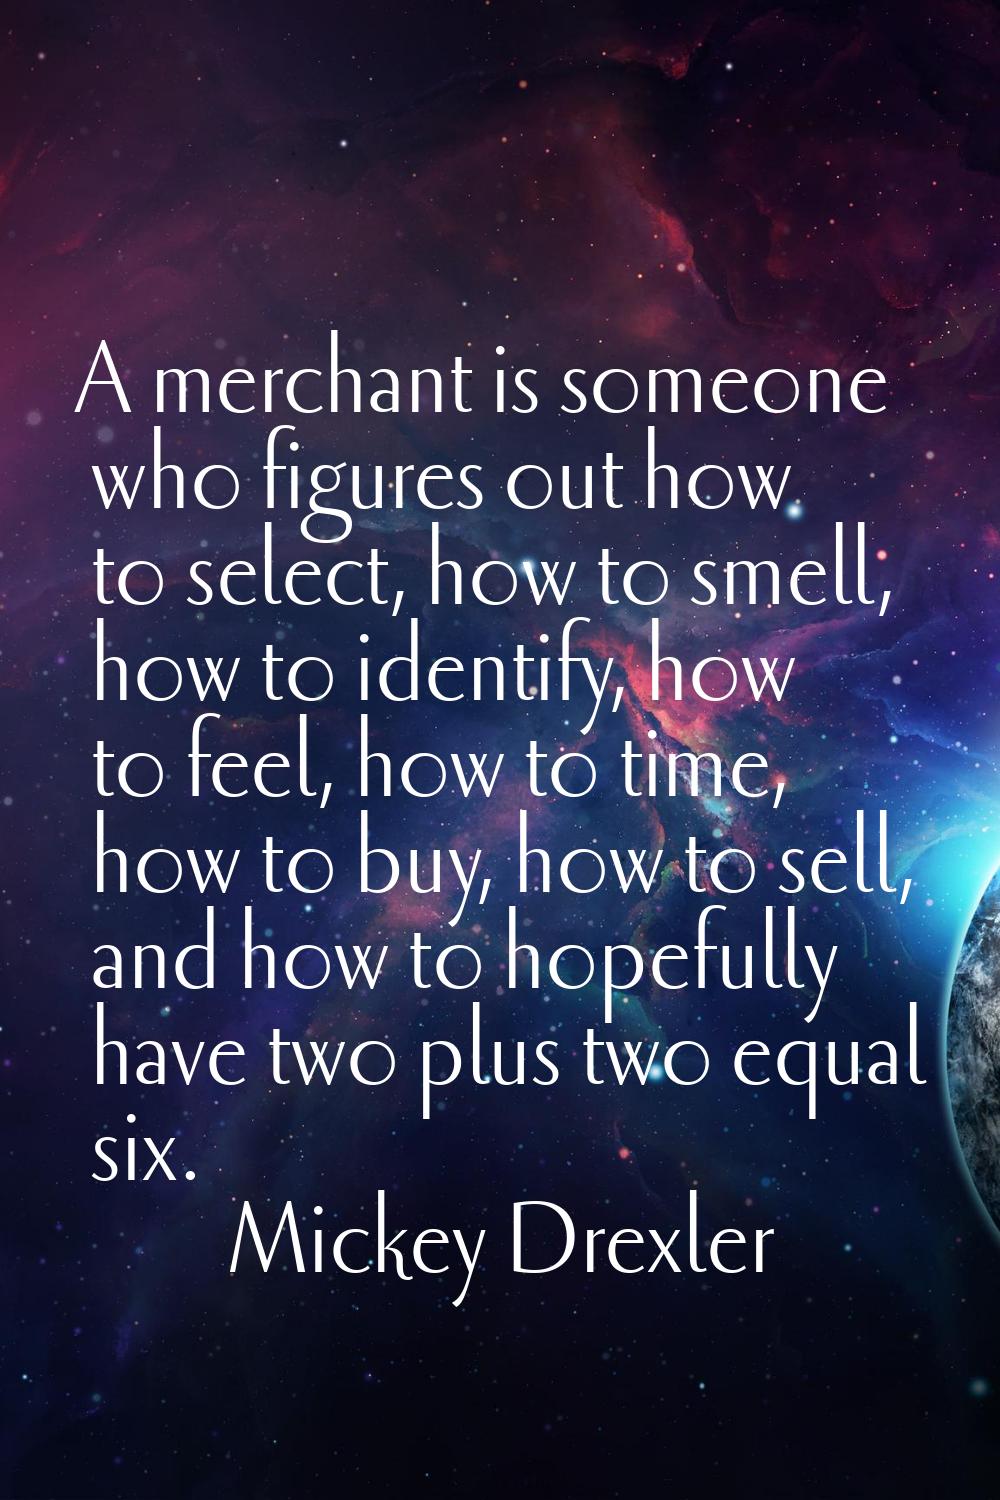 A merchant is someone who figures out how to select, how to smell, how to identify, how to feel, ho